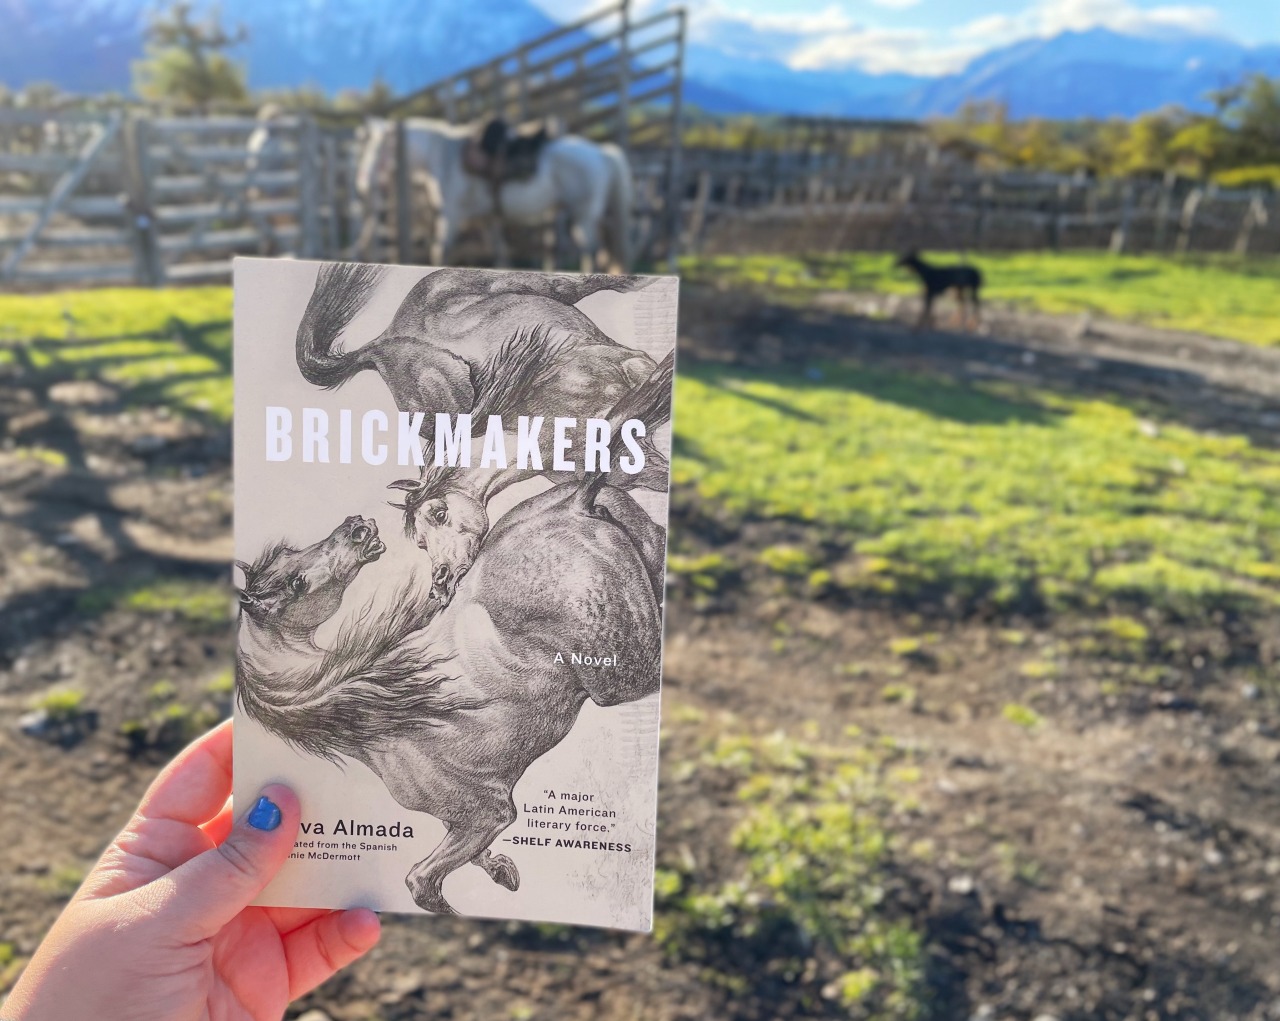 Selva Almada doesn’t miss. In Brickmakers, translated by Annie McDermott, she writes about two rival families who hold a deep-seated grudge against each other: the book begins with Pájaro and Marciano, two sons of the two fathers, both lying in the...